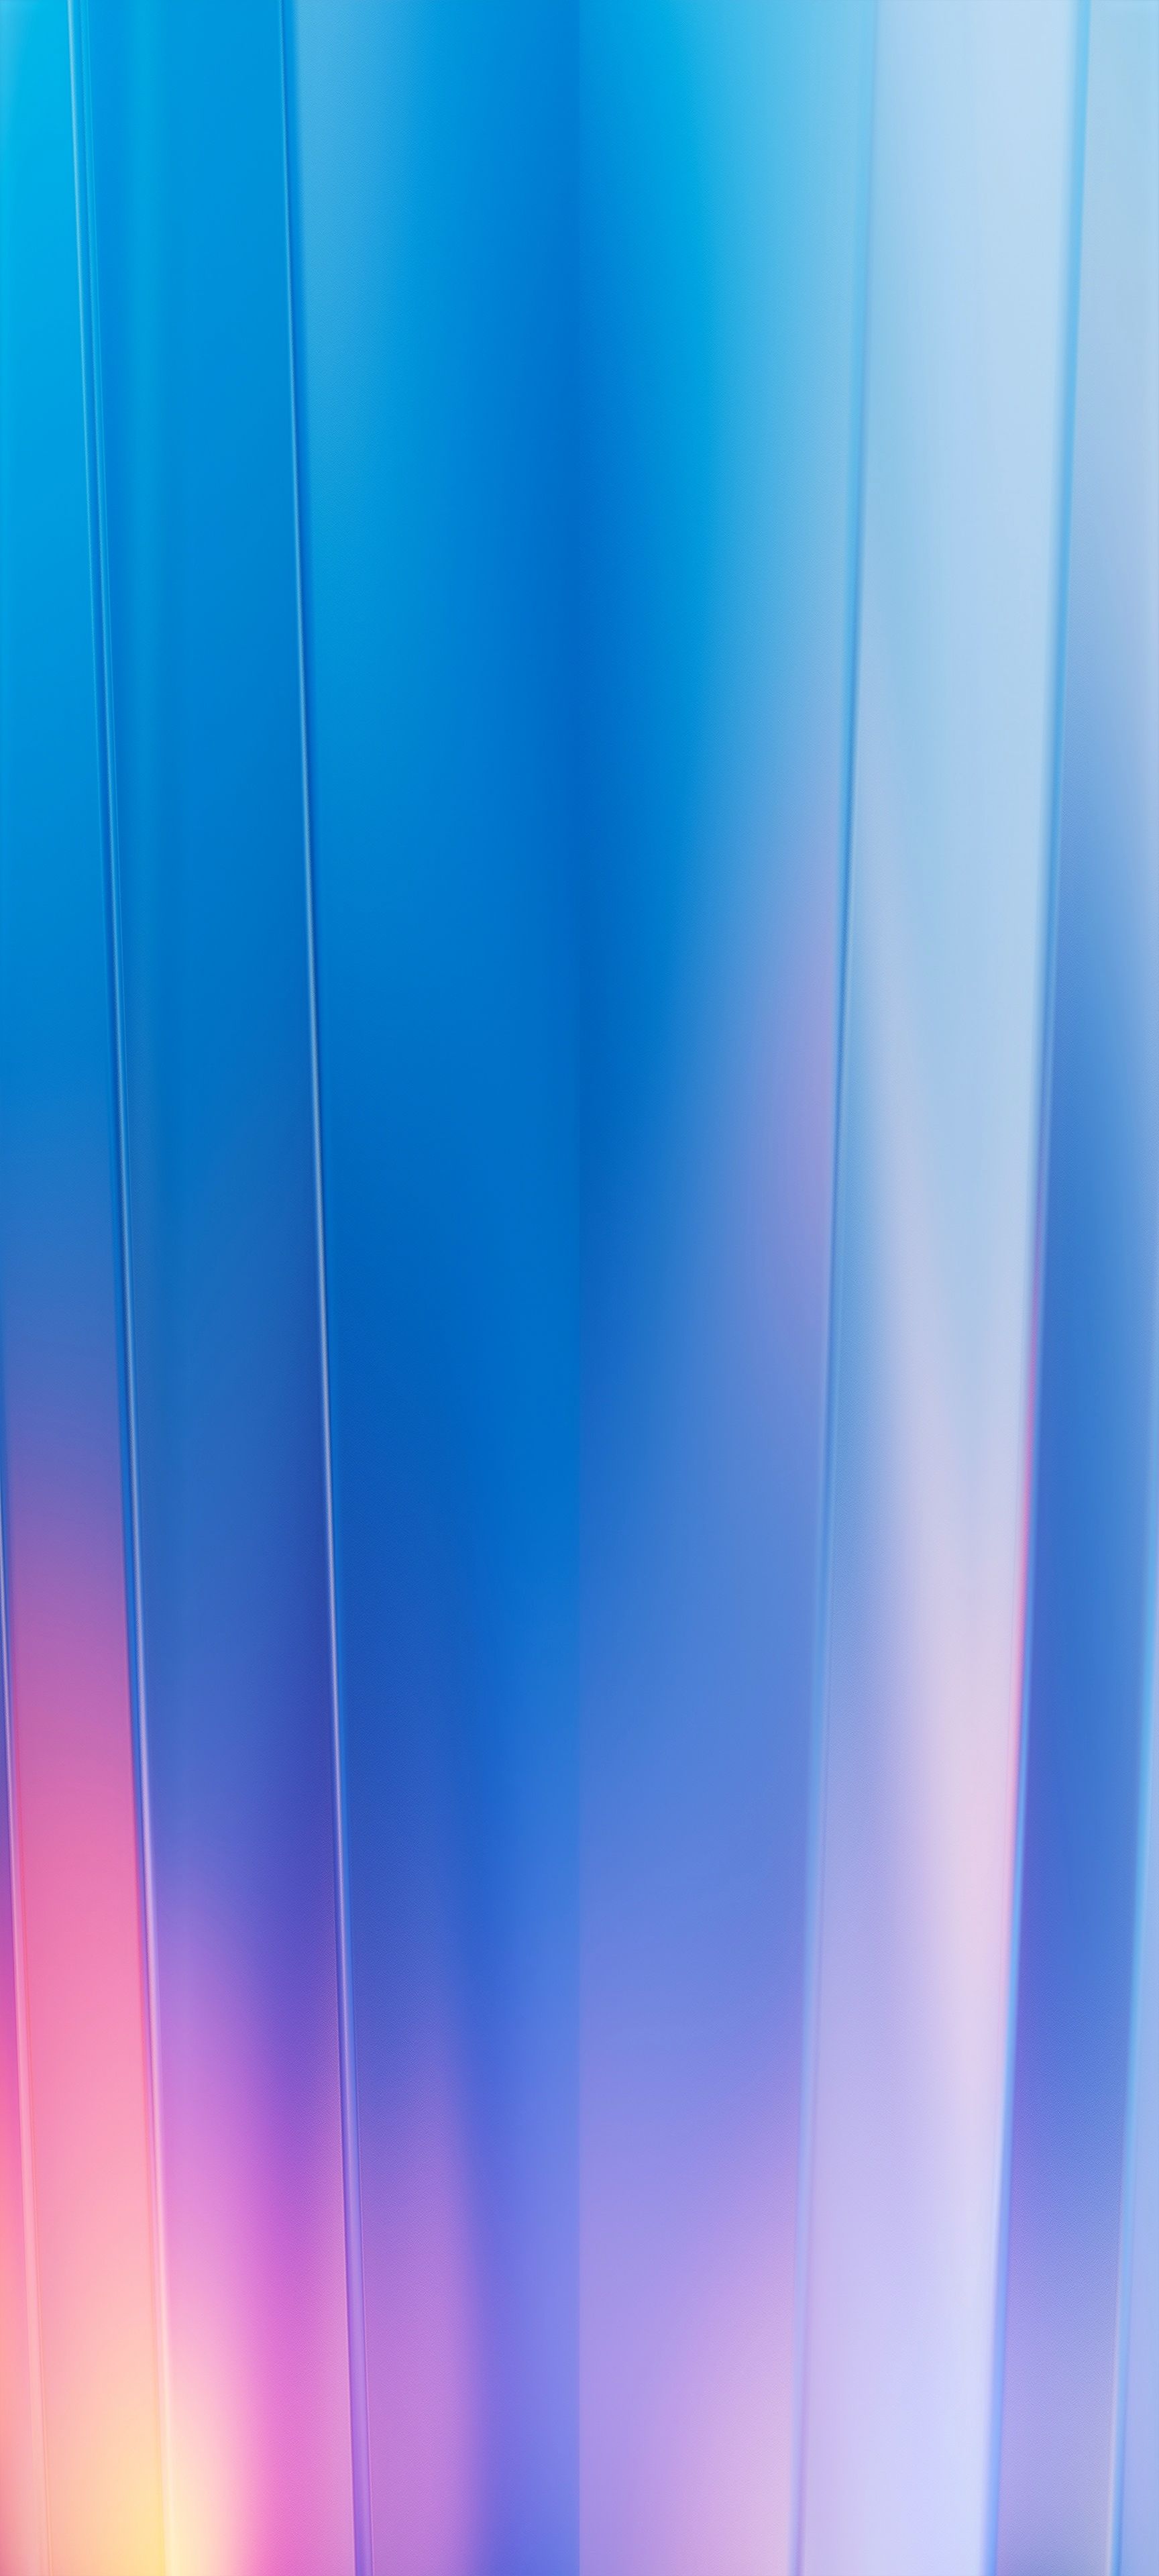 A colorful abstract background with a gradient of blue, purple, and pink. - Bright, modern, colorful